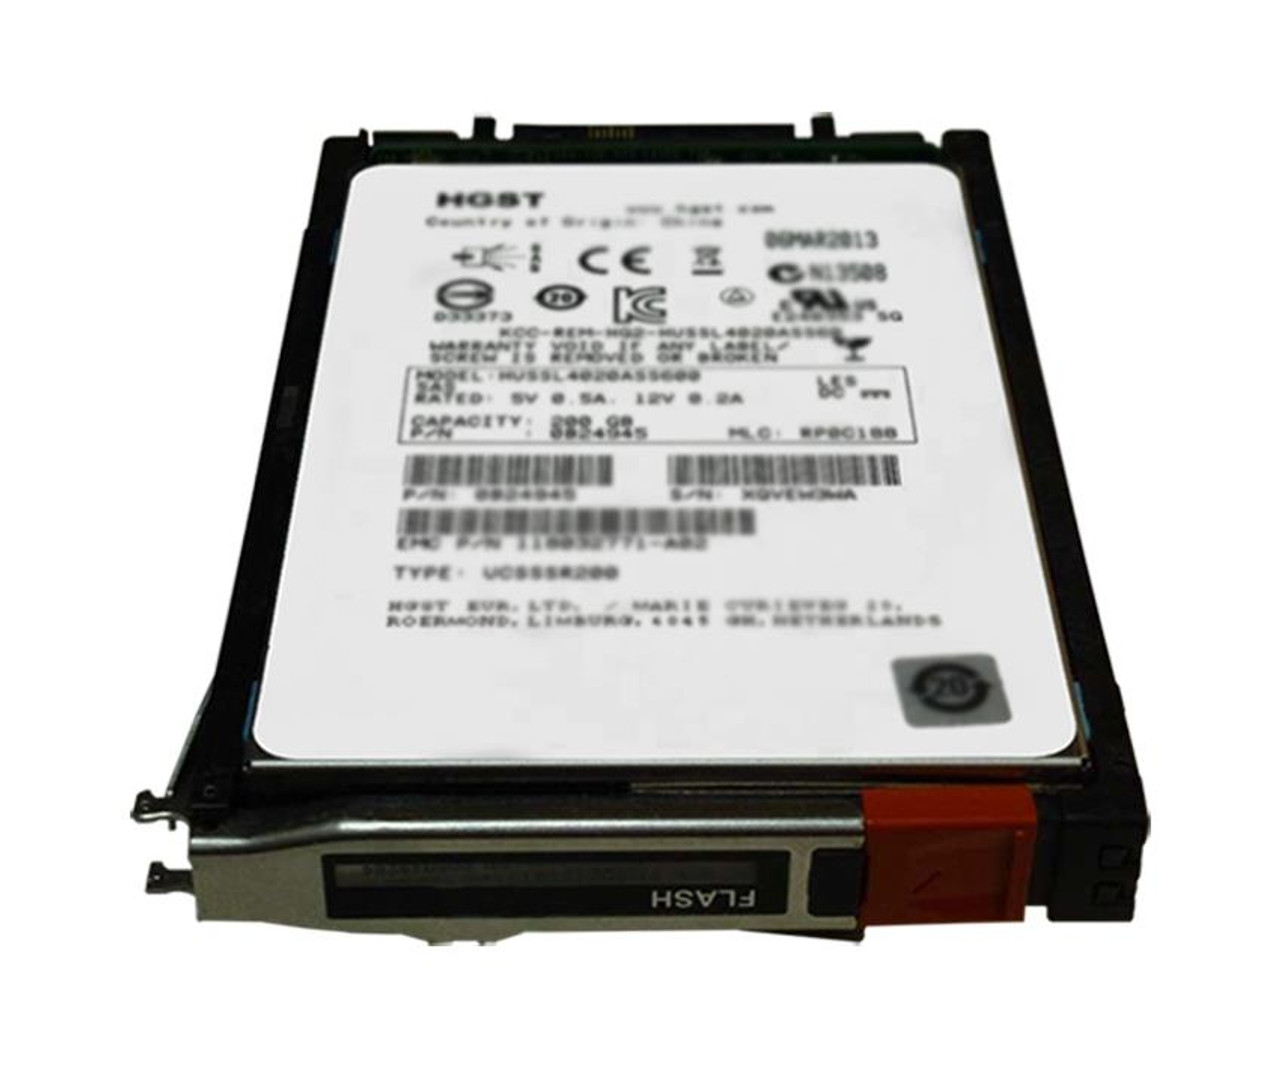 D3NF-2SFXL-400TU EMC 400GB SAS 12Gbps 2.5-inch Internal Solid State Drive (SSD) Upgrade for Unity AFA 25 x 2.5 Enclosure